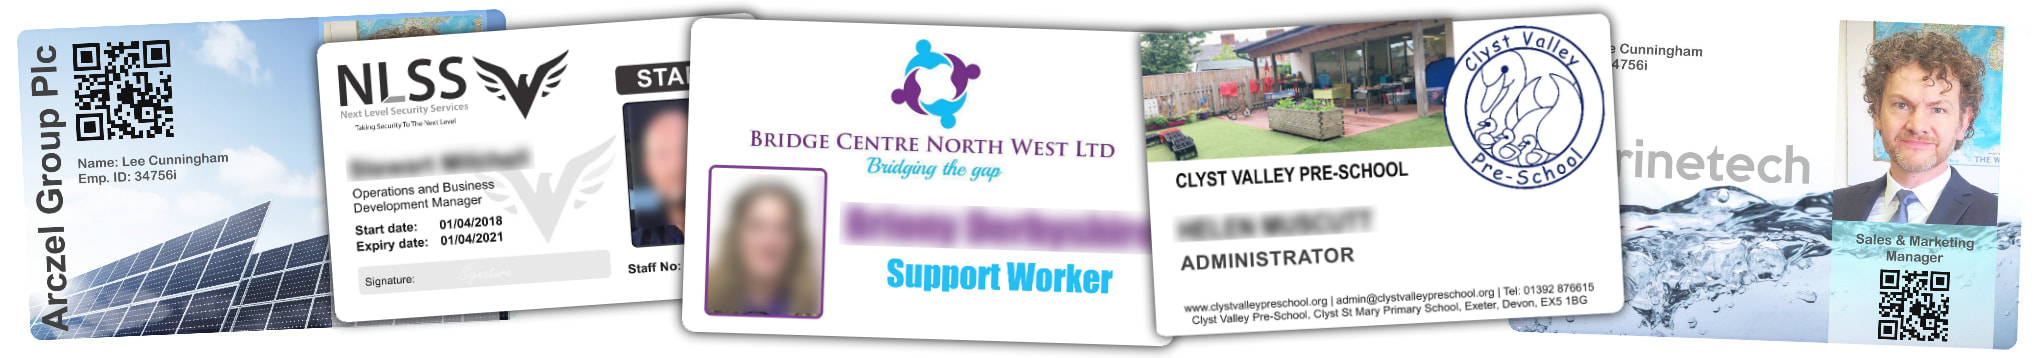 Portsmouth examples of staff photo ID cards | samples of employee Identity card printing | Workers ID cards printed in Portsmouth